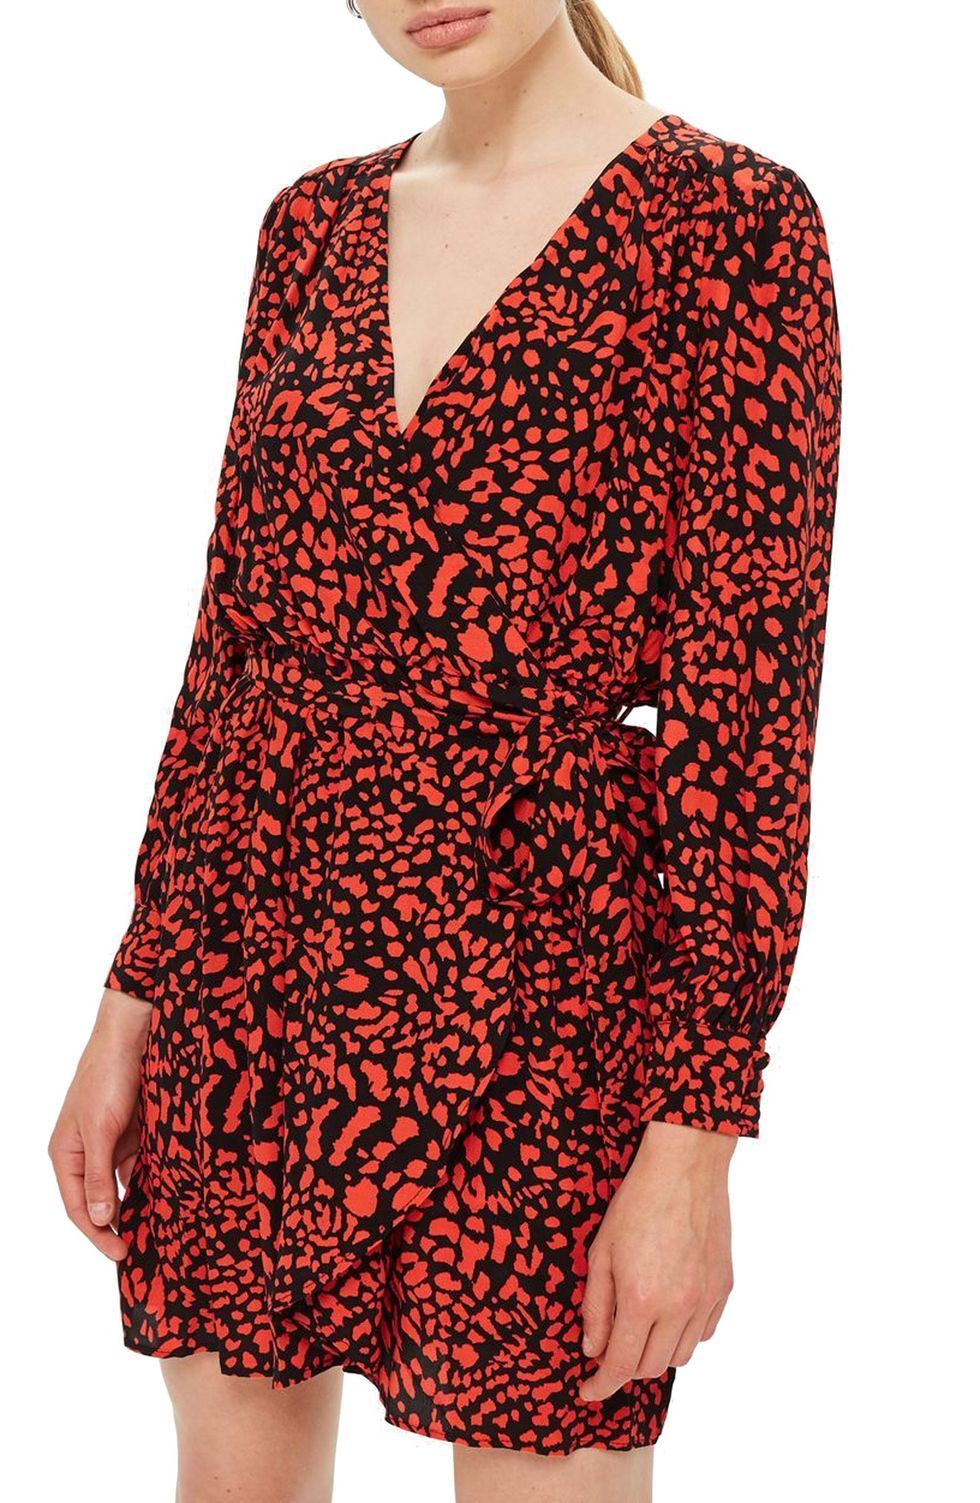 A Fun, Printed Dress that's Transitional